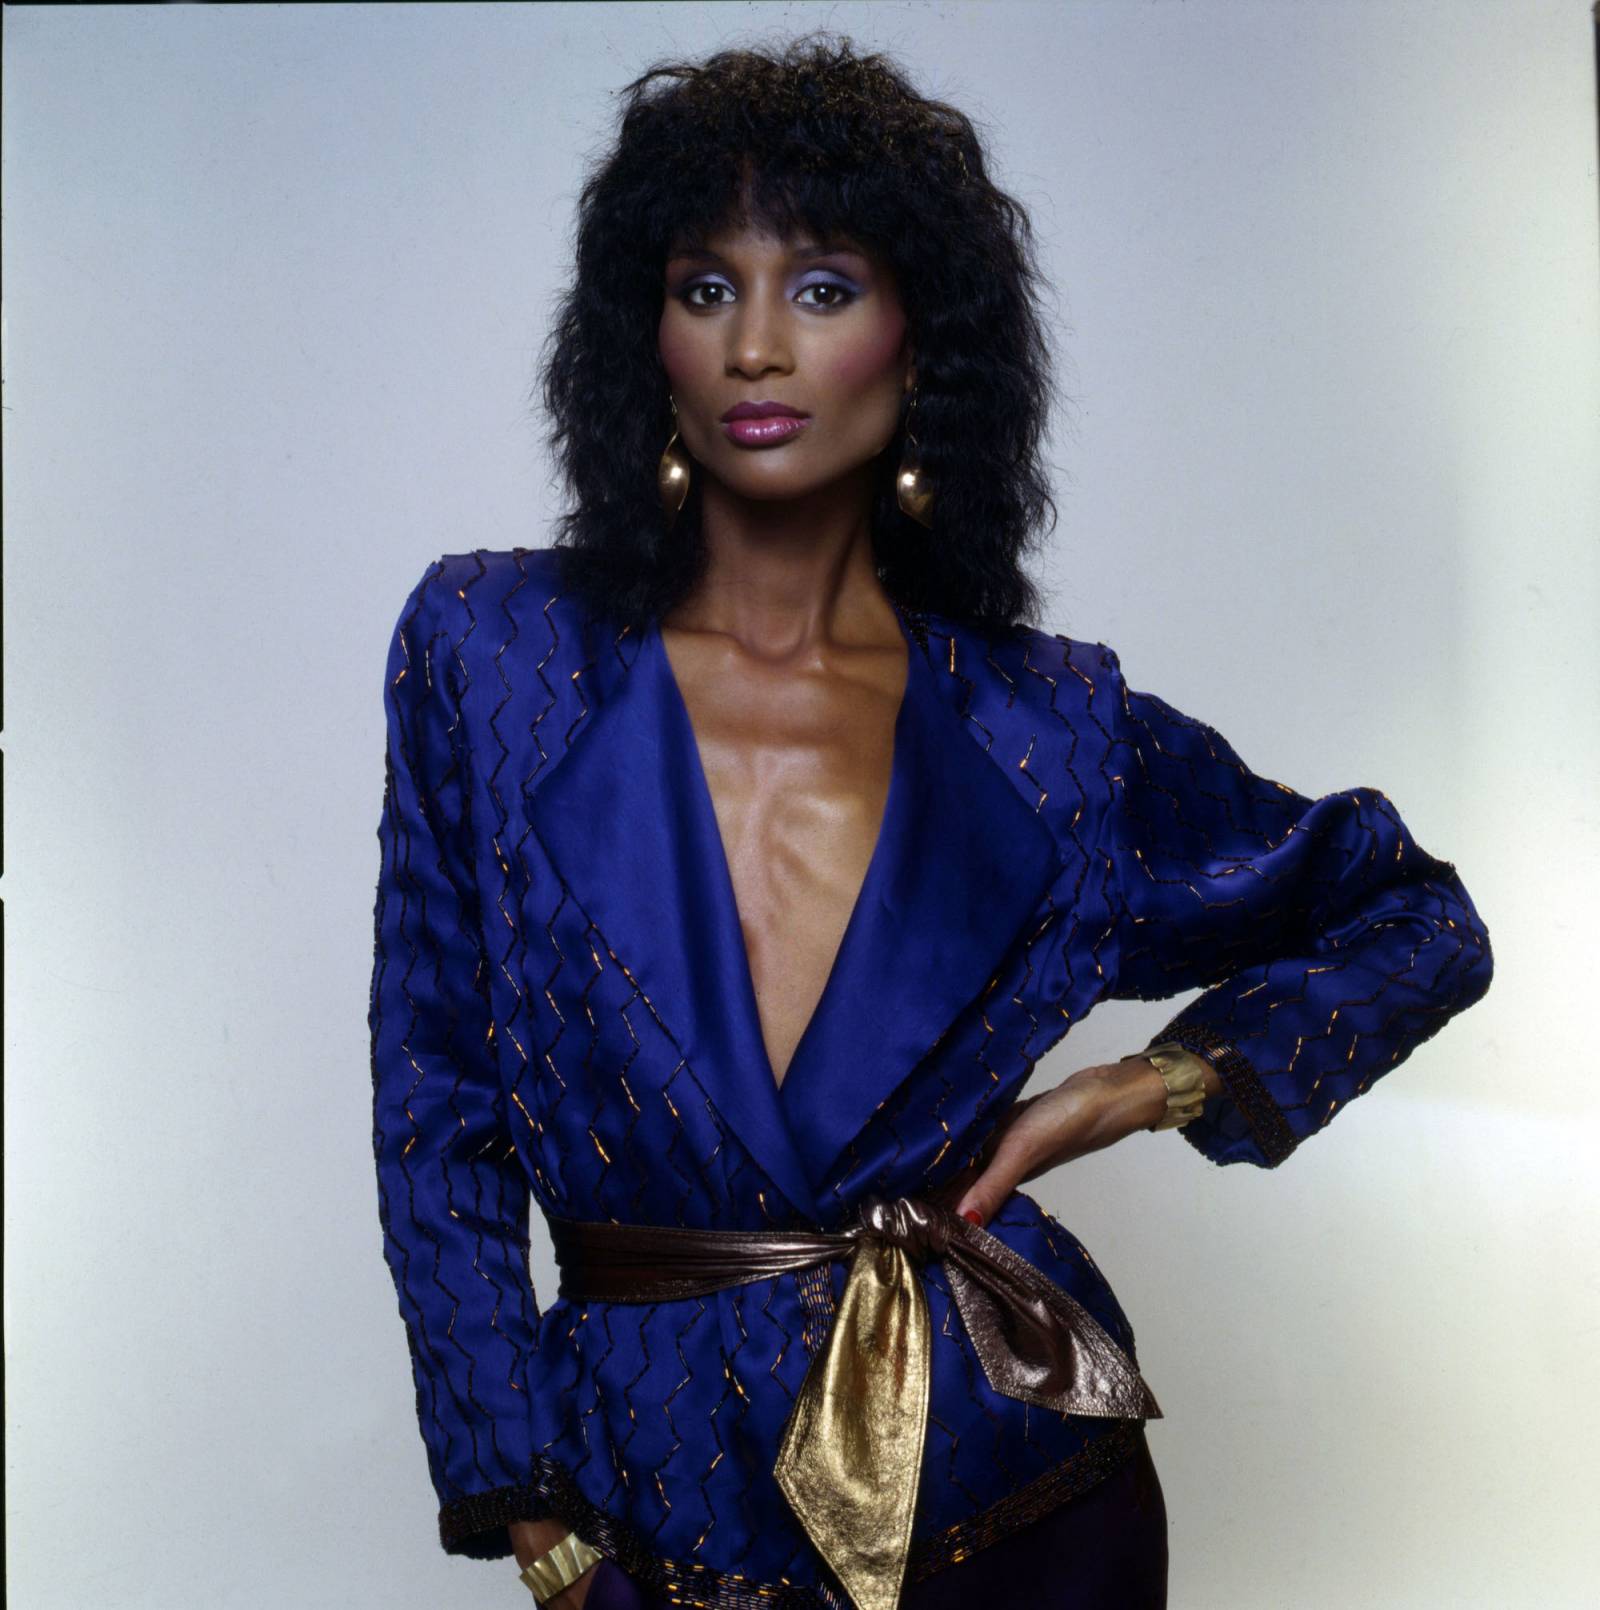 Beverly Johnson, 1985 rok / Fot. Getty Images